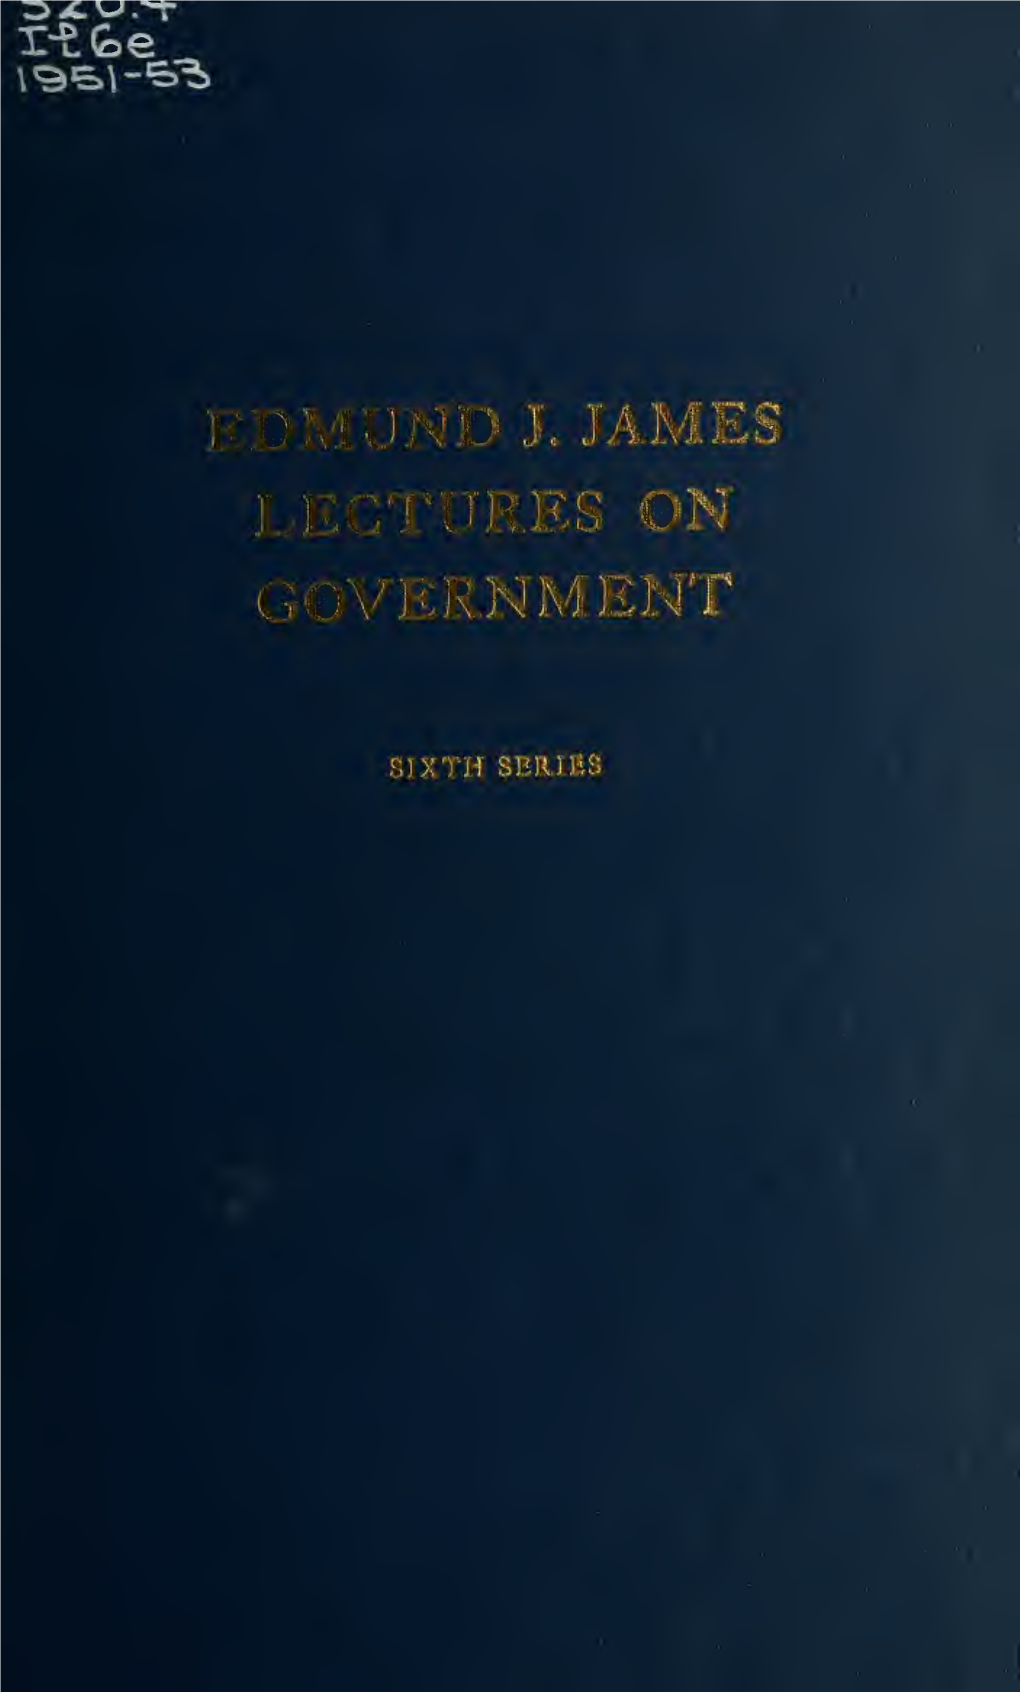 Edmund J. James Lecture on Government